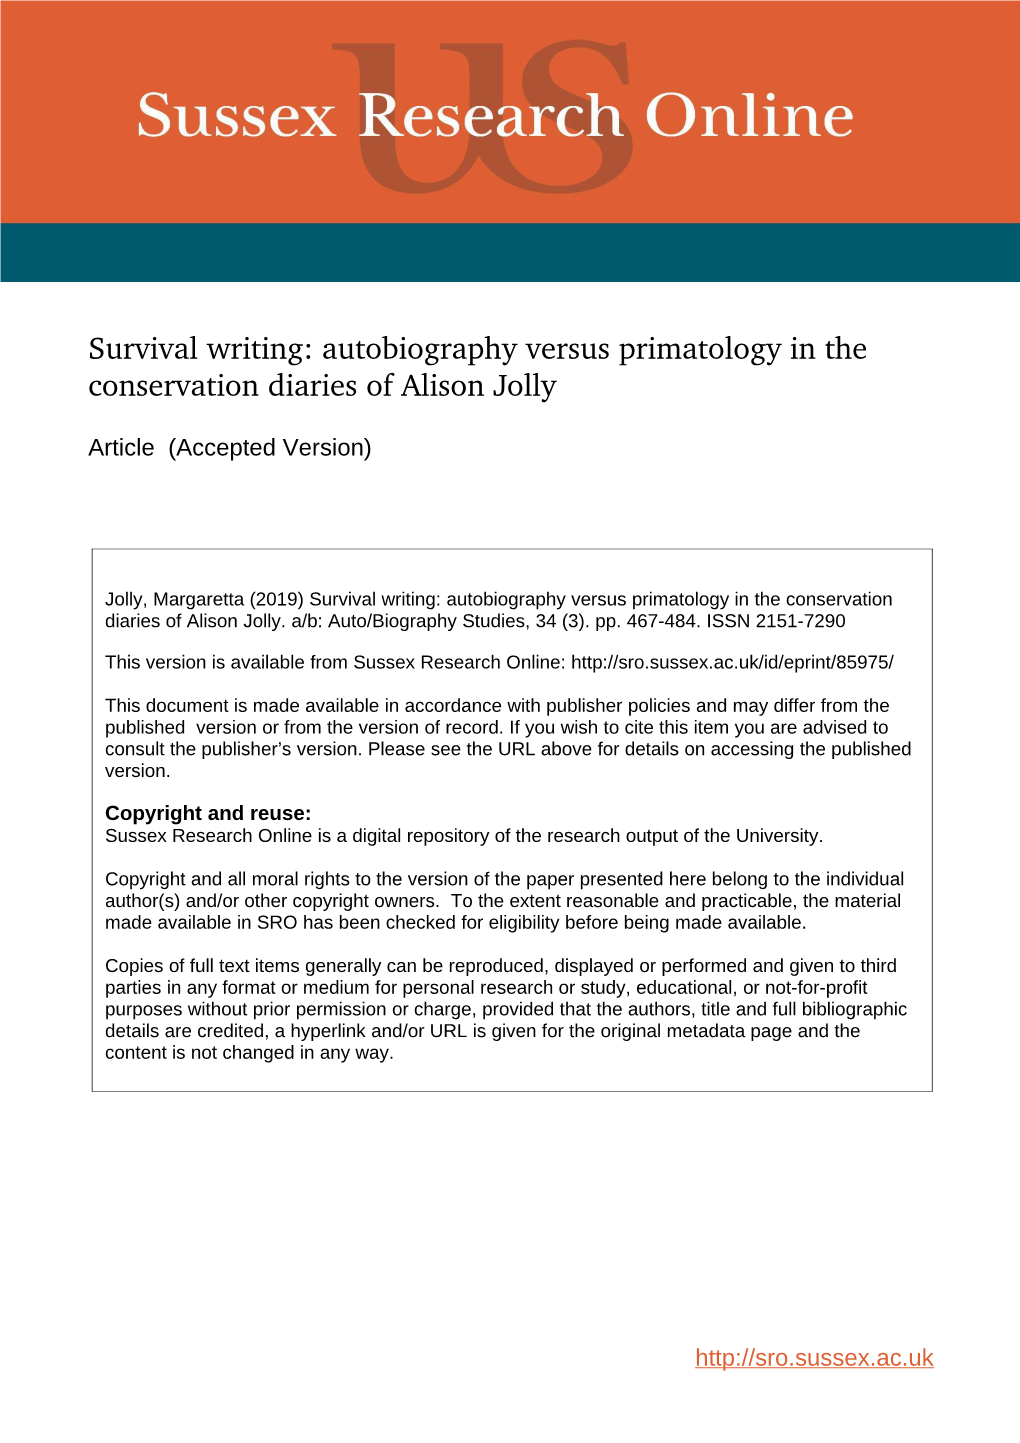 Survival Writing: Autobiography Versus Primatology in the Conservation Diaries of Alison Jolly